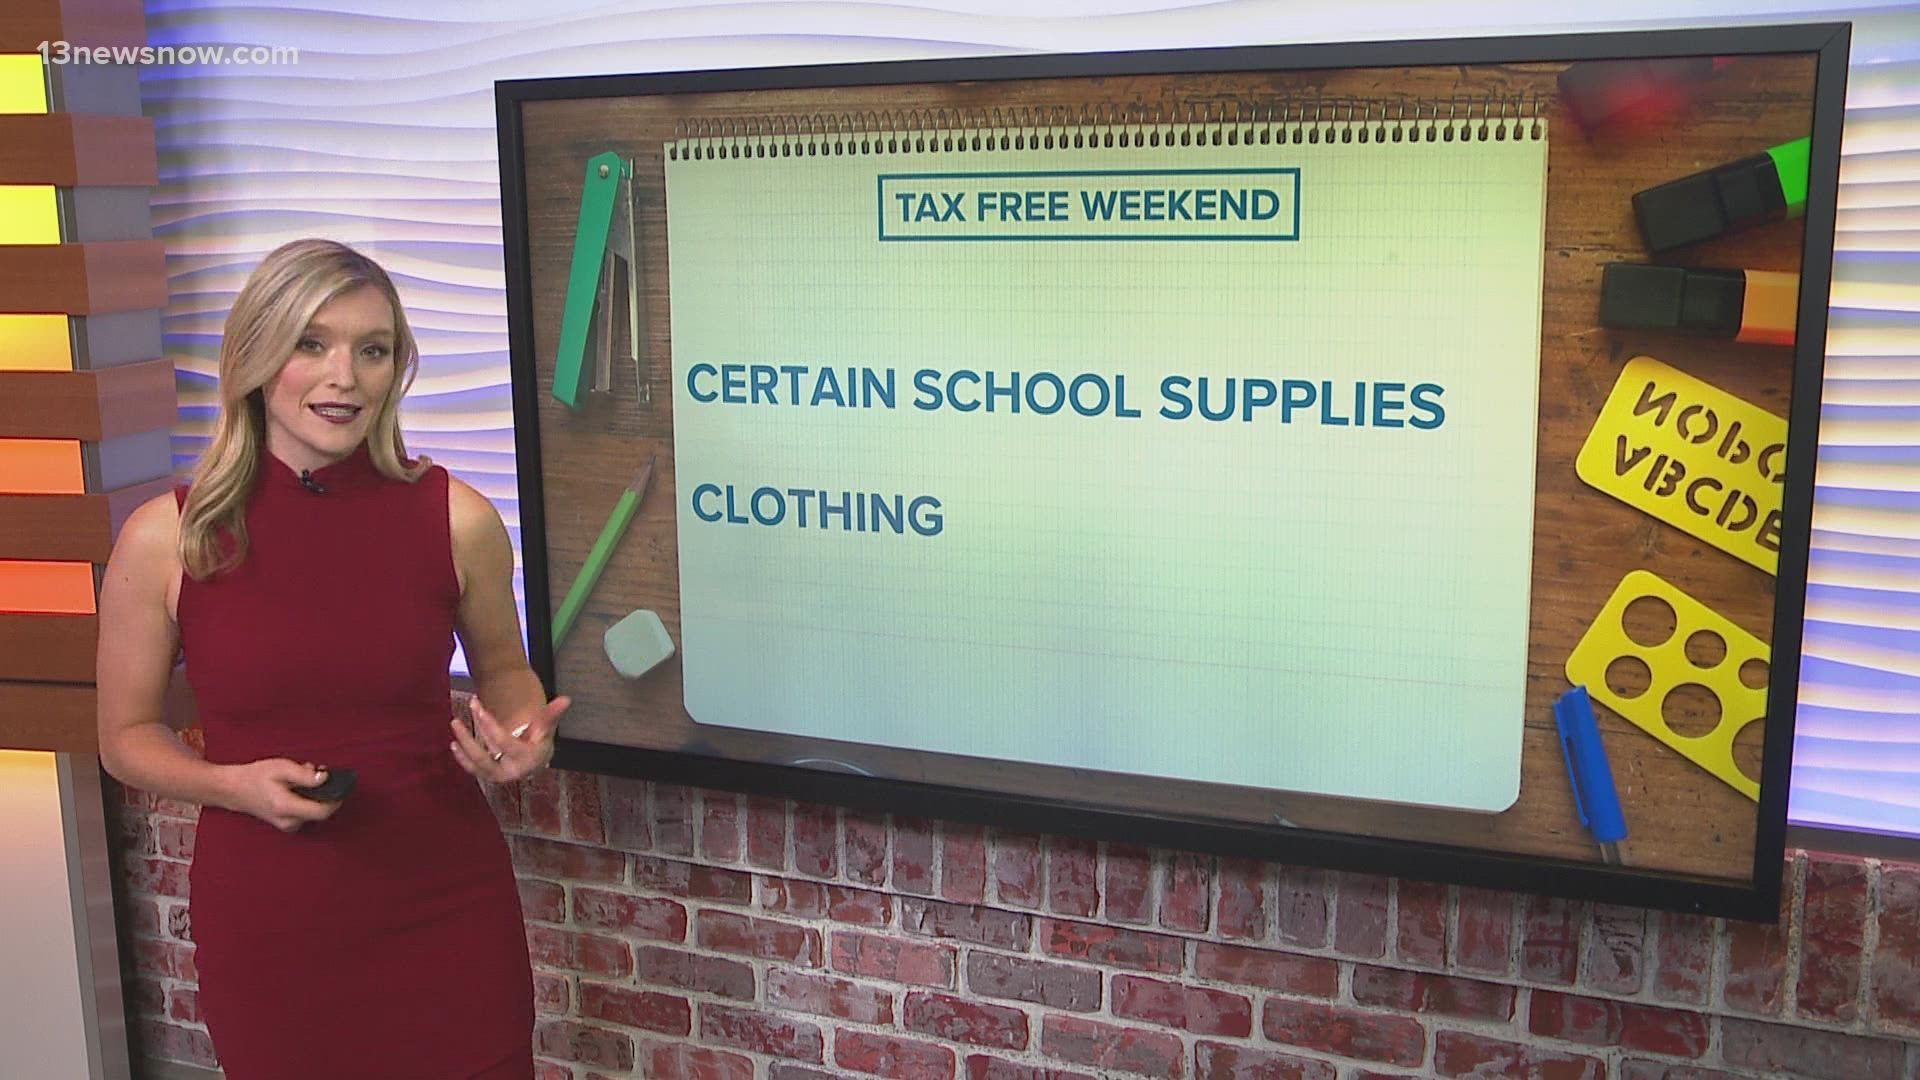 Virginia's sales tax holiday started Friday, and goes on until 11:59 p.m. Sunday, August 7.